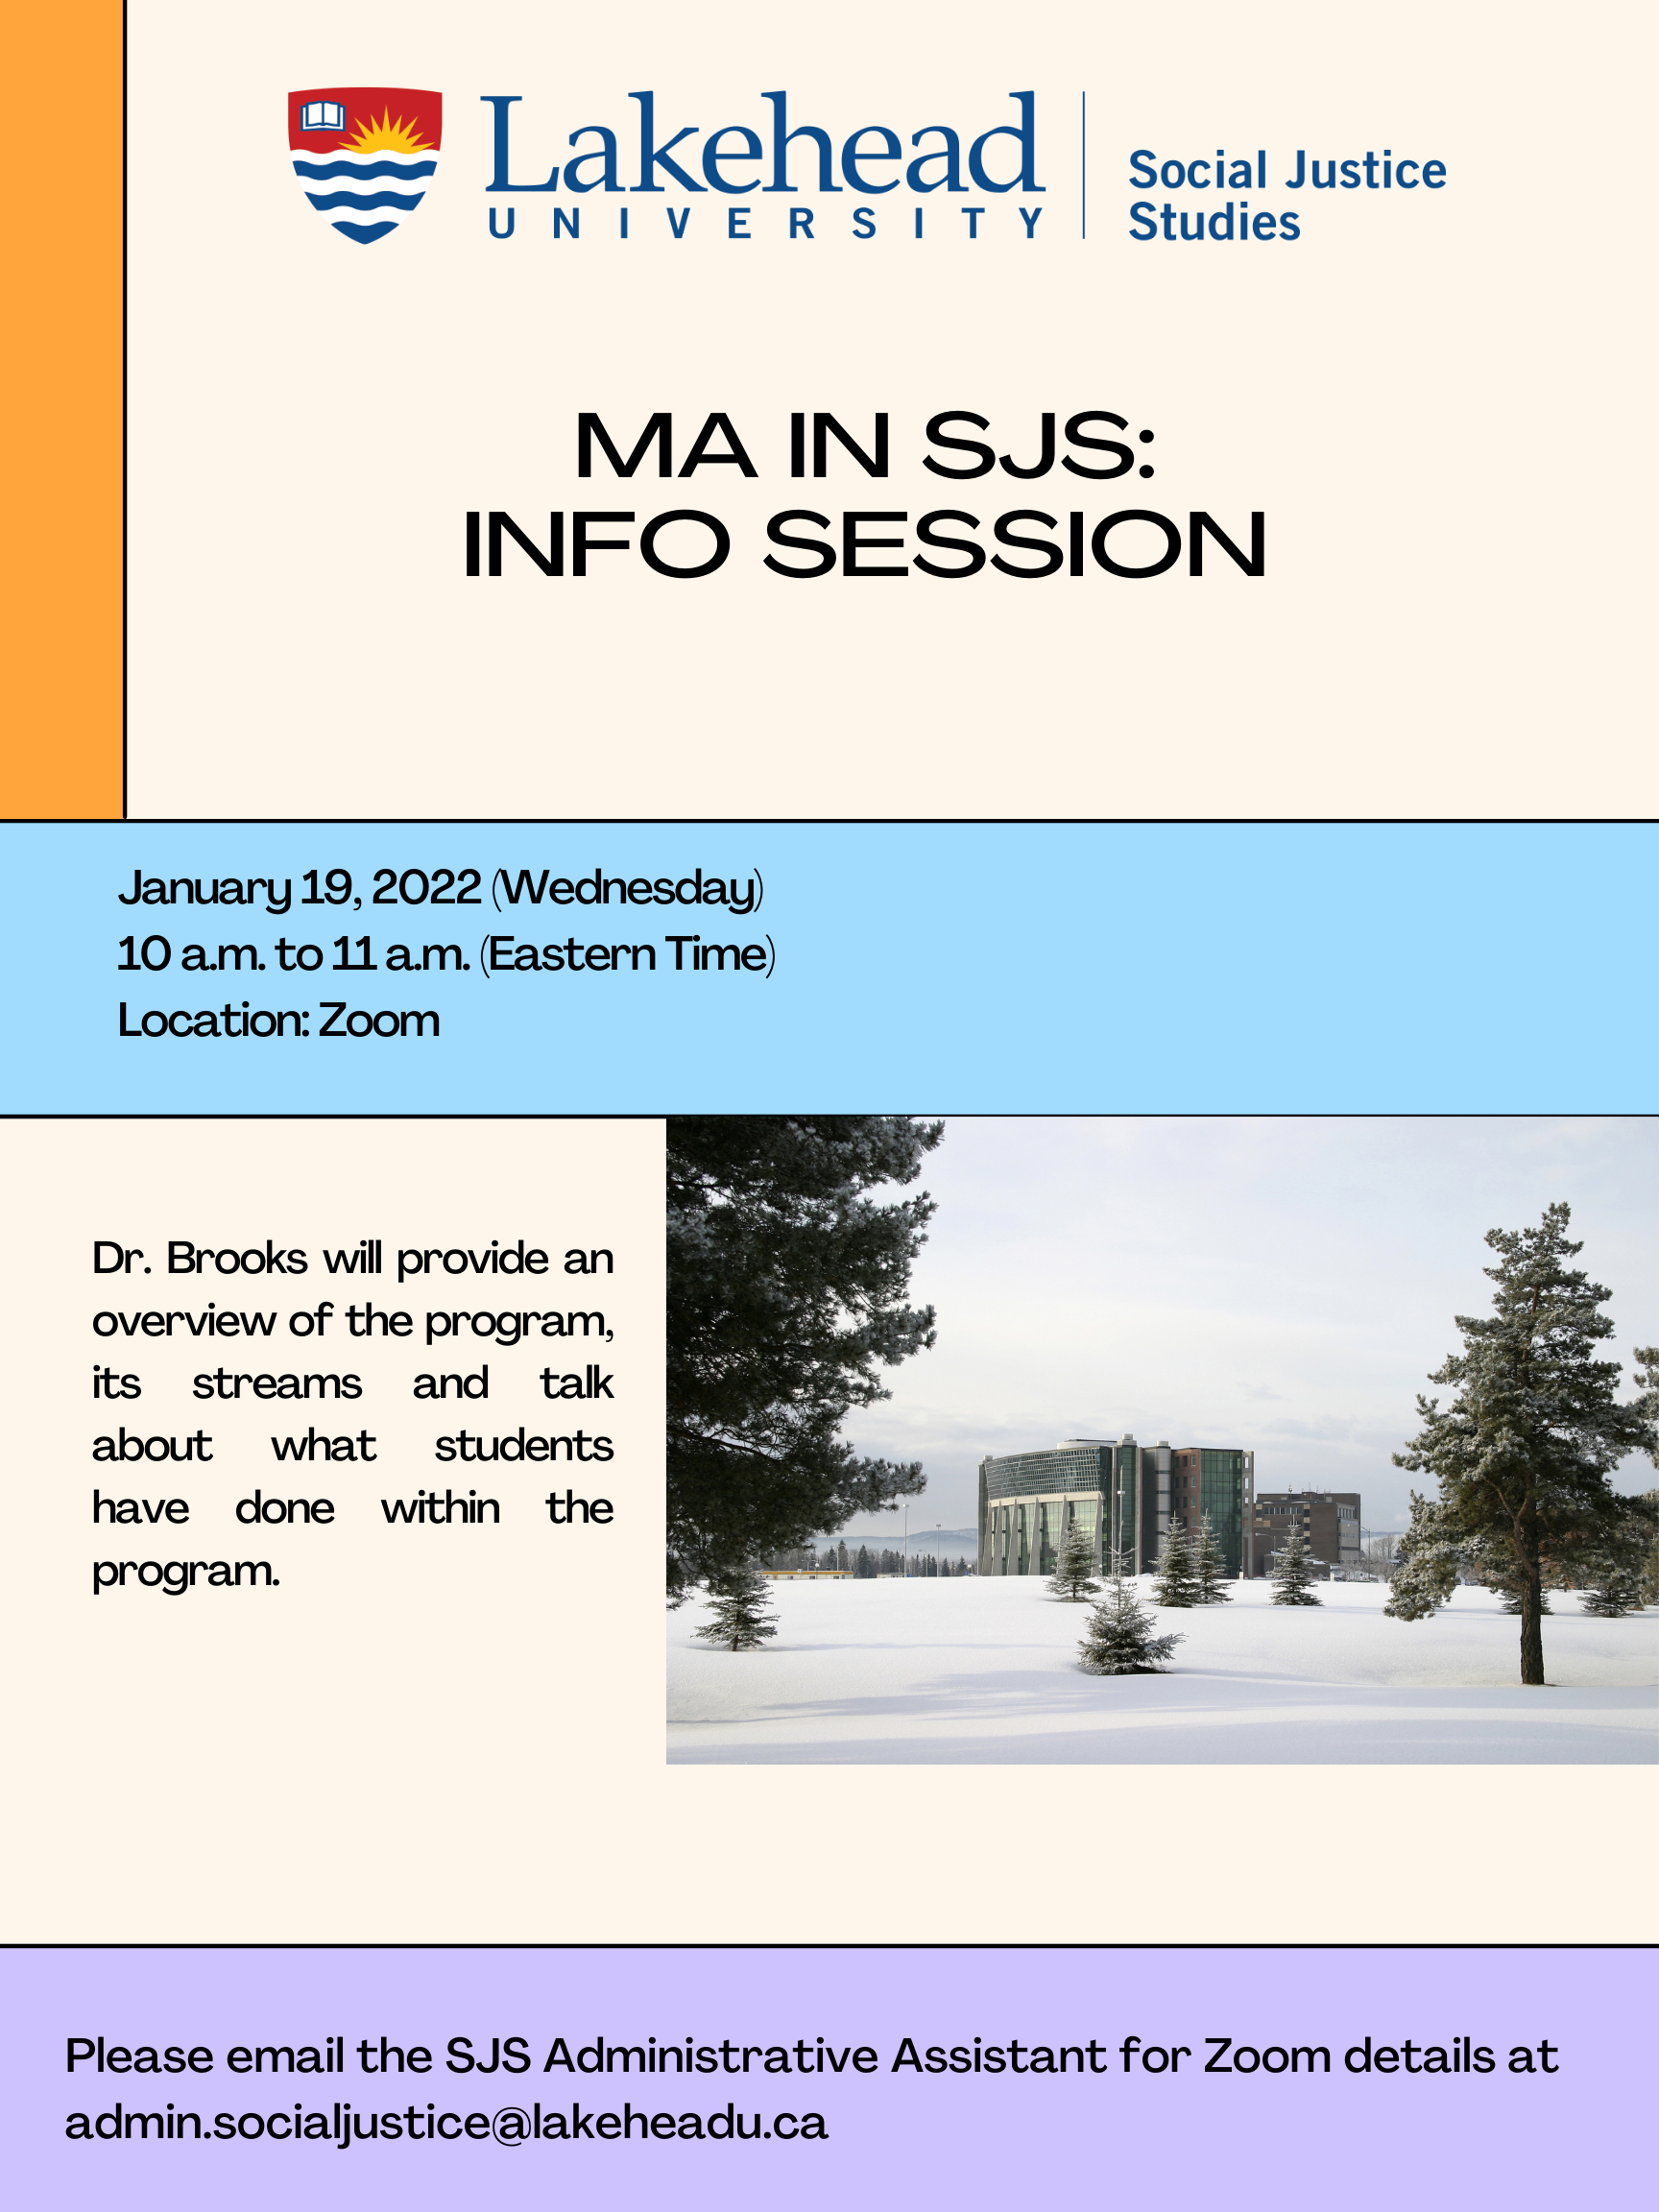 Event poster contains the SJS LU logo. Dr. Brooks will provide an overview of the program, its streams and talk about what students have done within the program. January 19, 2022 (Wednesday) 10 a.m. to 11 a.m. (Eastern Time) Location: ZoomPlease email the SJS Administrative Assistant for Zoom details at admin.socialjustice@lakeheadu.ca